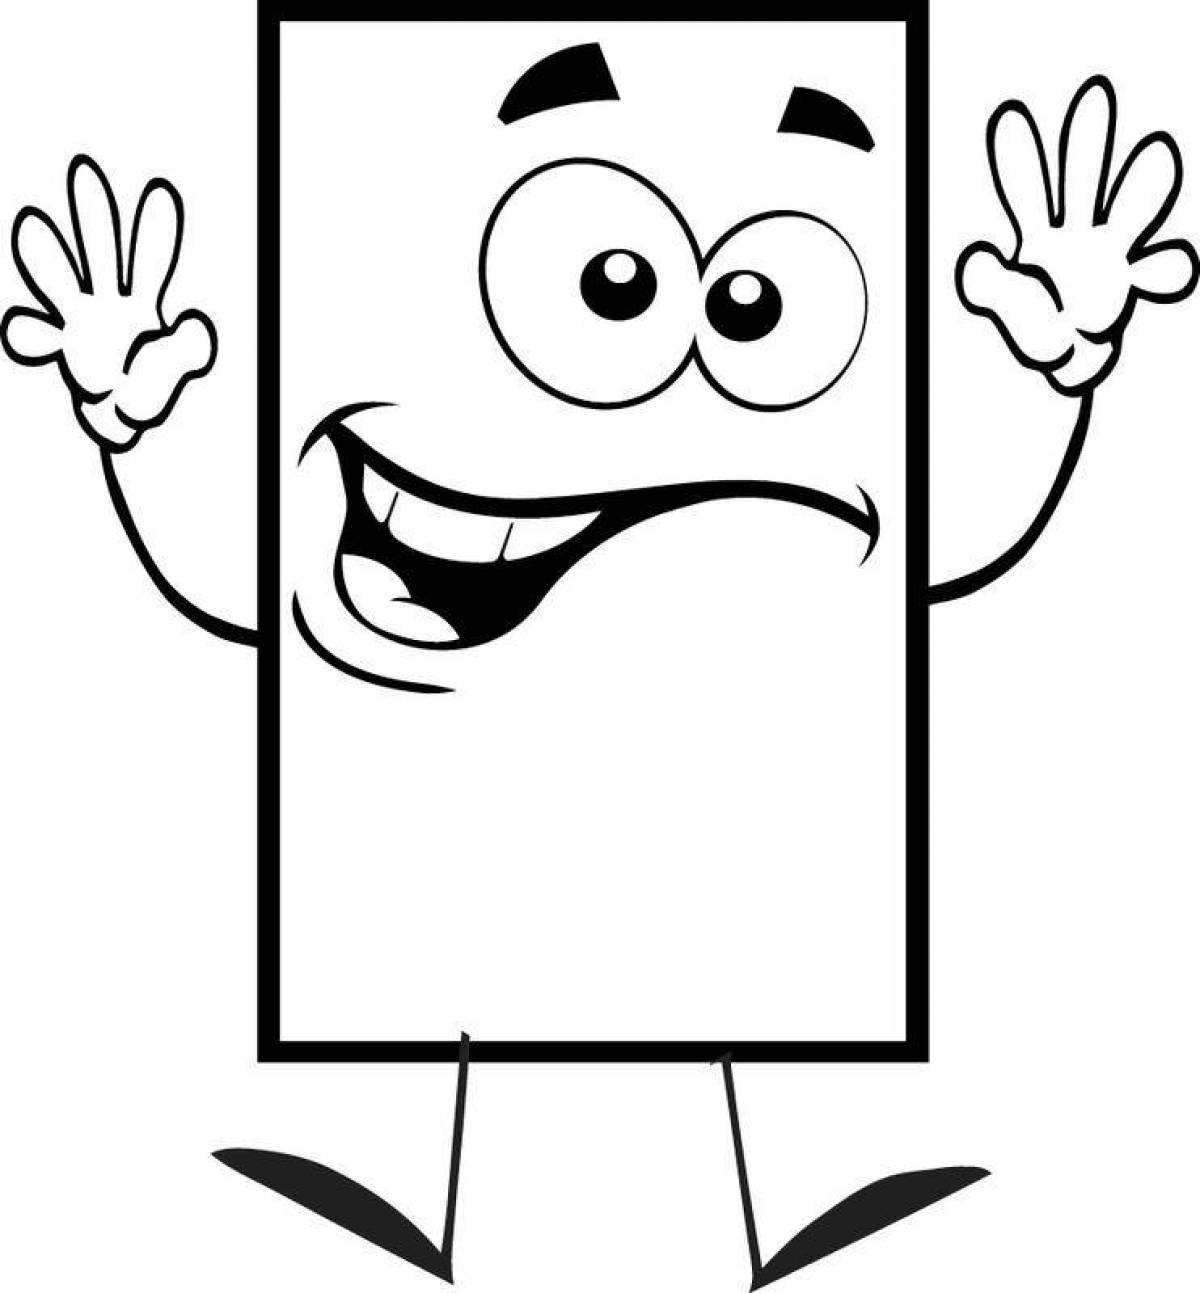 Amazing rectangle coloring page